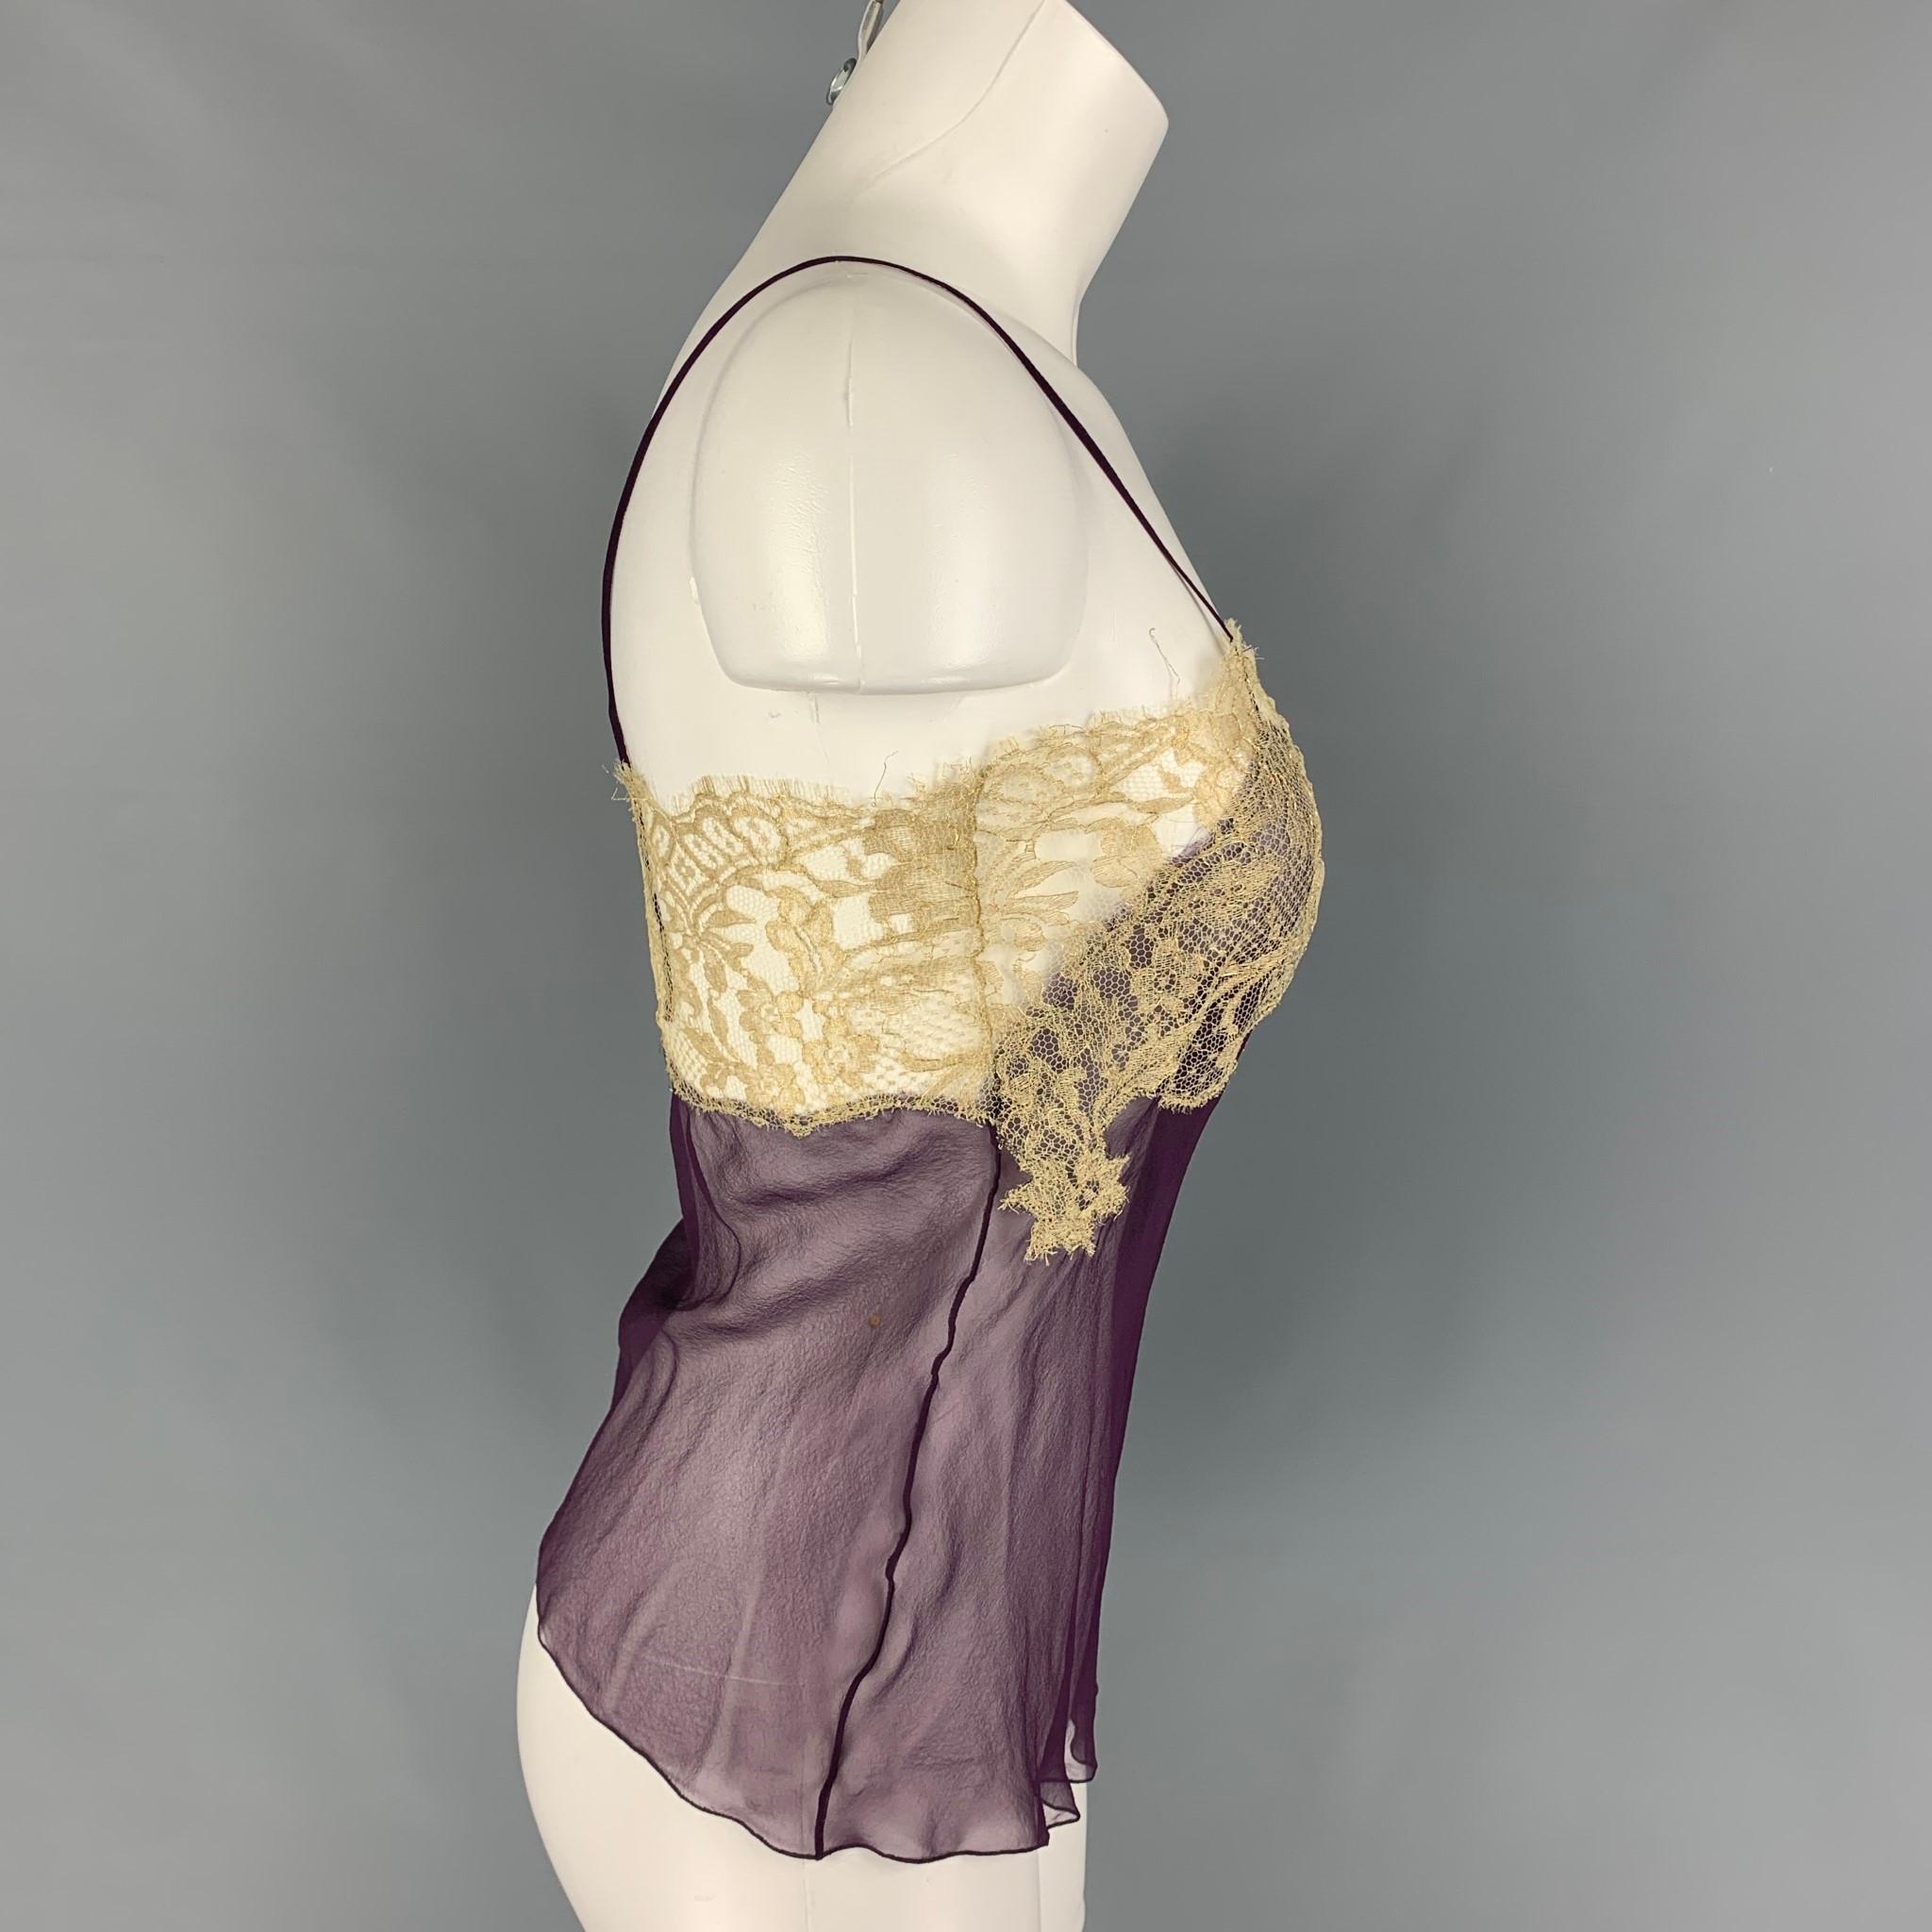 SALVATORE FERRAGAMO camisole blouse comes in a eggplant silk featuring a gold tone lace and spaghetti straps. Made in Italy. 

Very Good Pre-Owned Condition.
Marked: 38

Measurements:

Bust: 30 in.
Length: 16.5 in. 